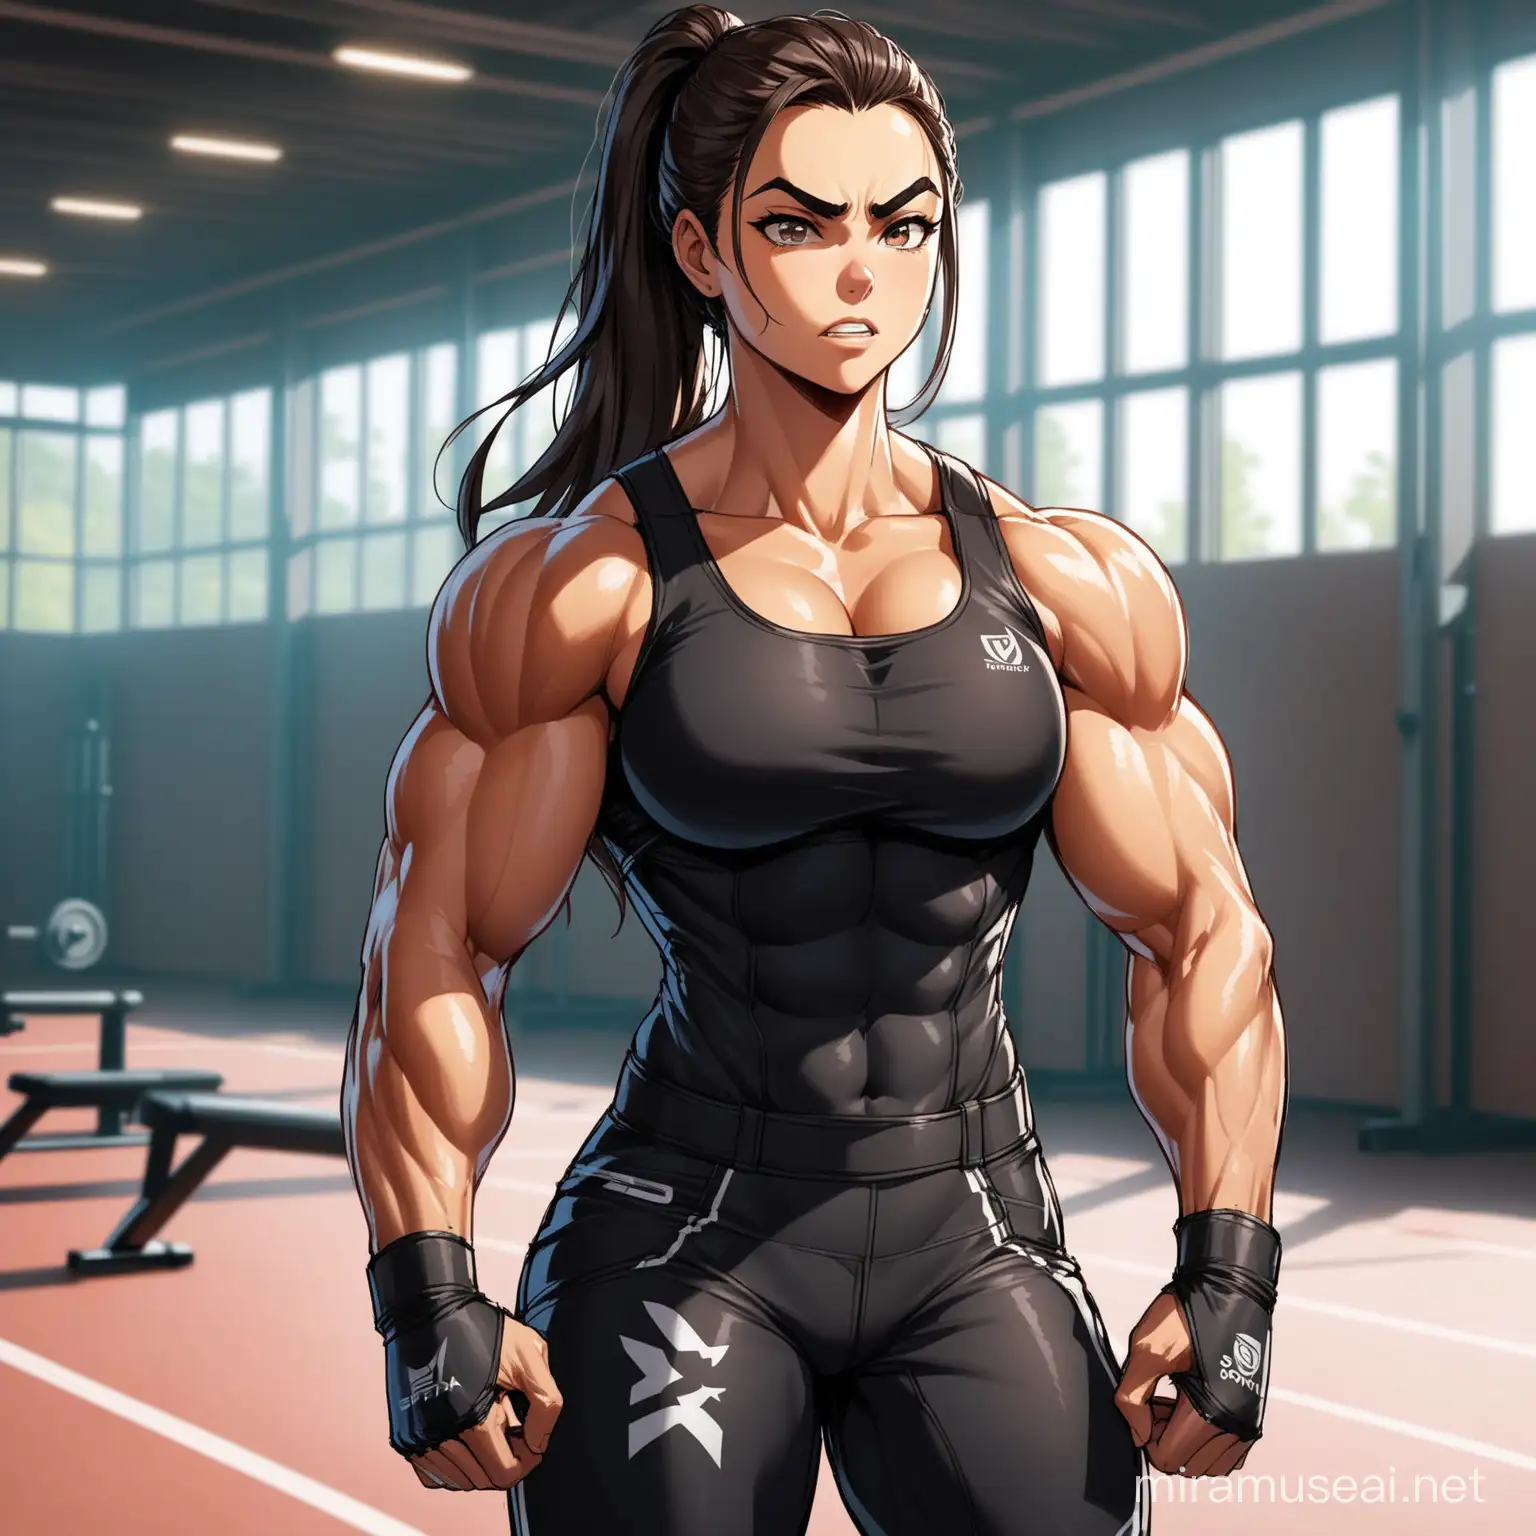 Intimidating Young Woman in Dark Athletic Wear Sofias Dominant Presence